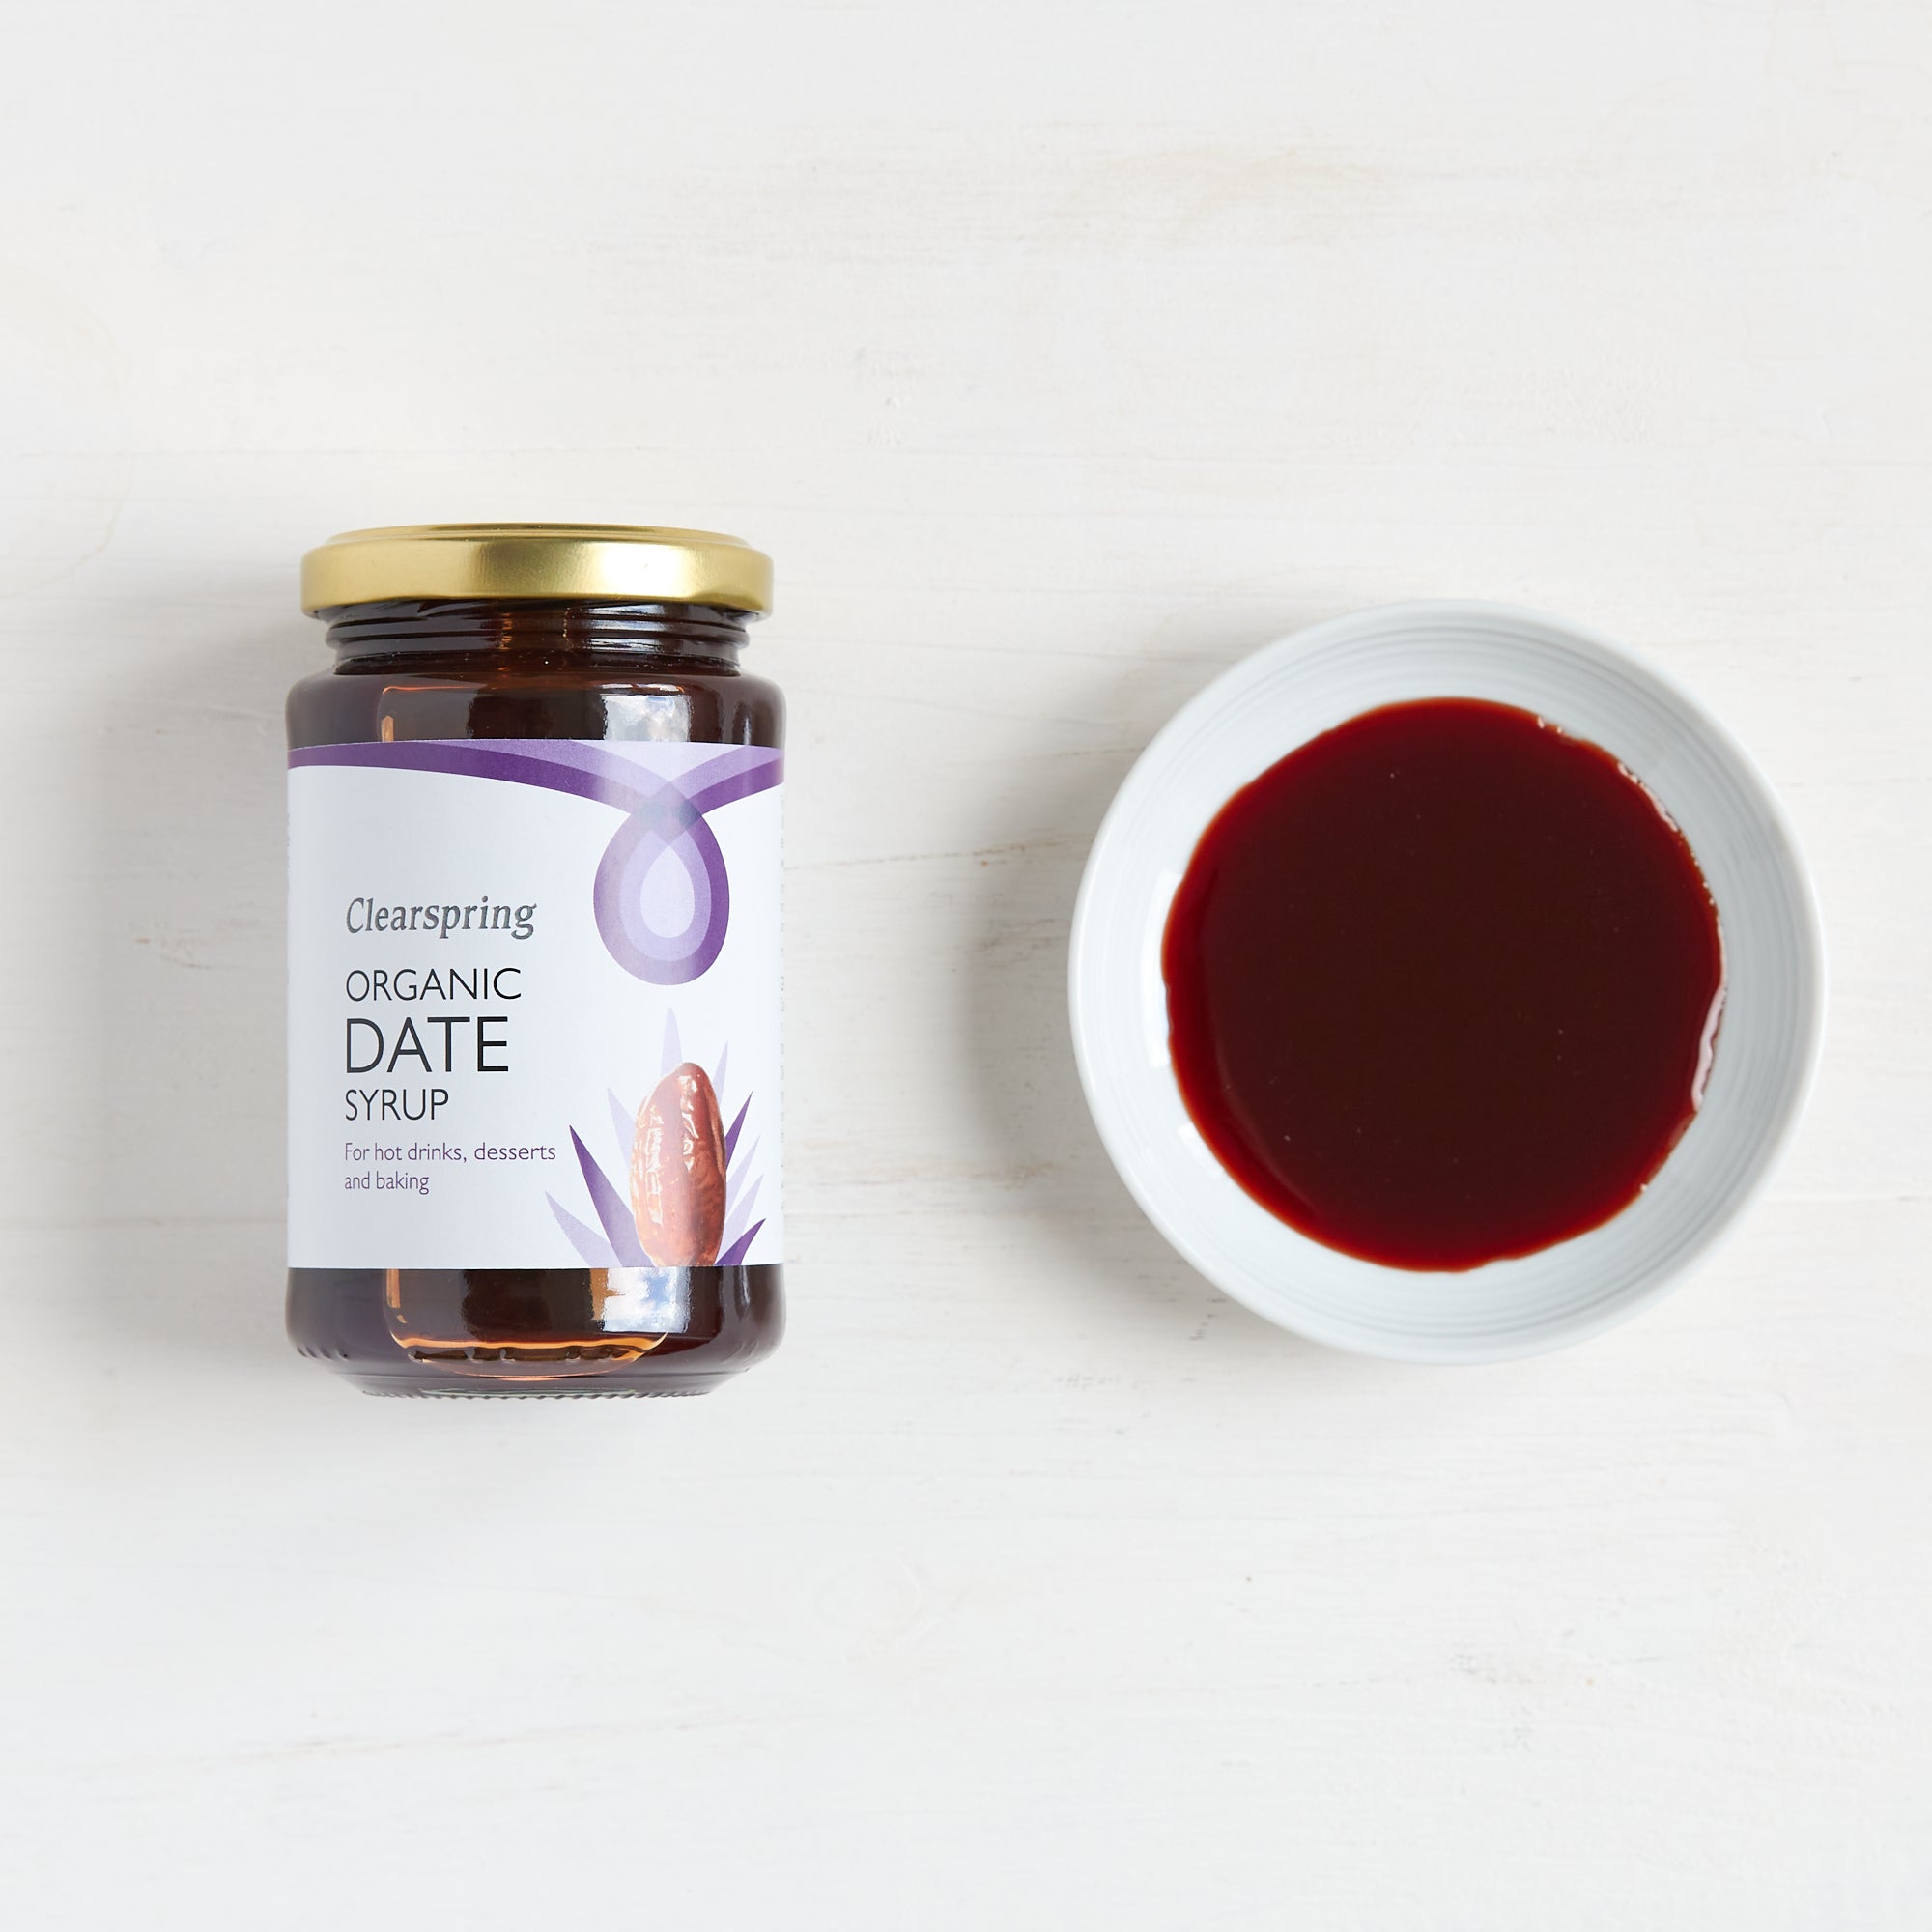 Clearspring Organic Date Syrup